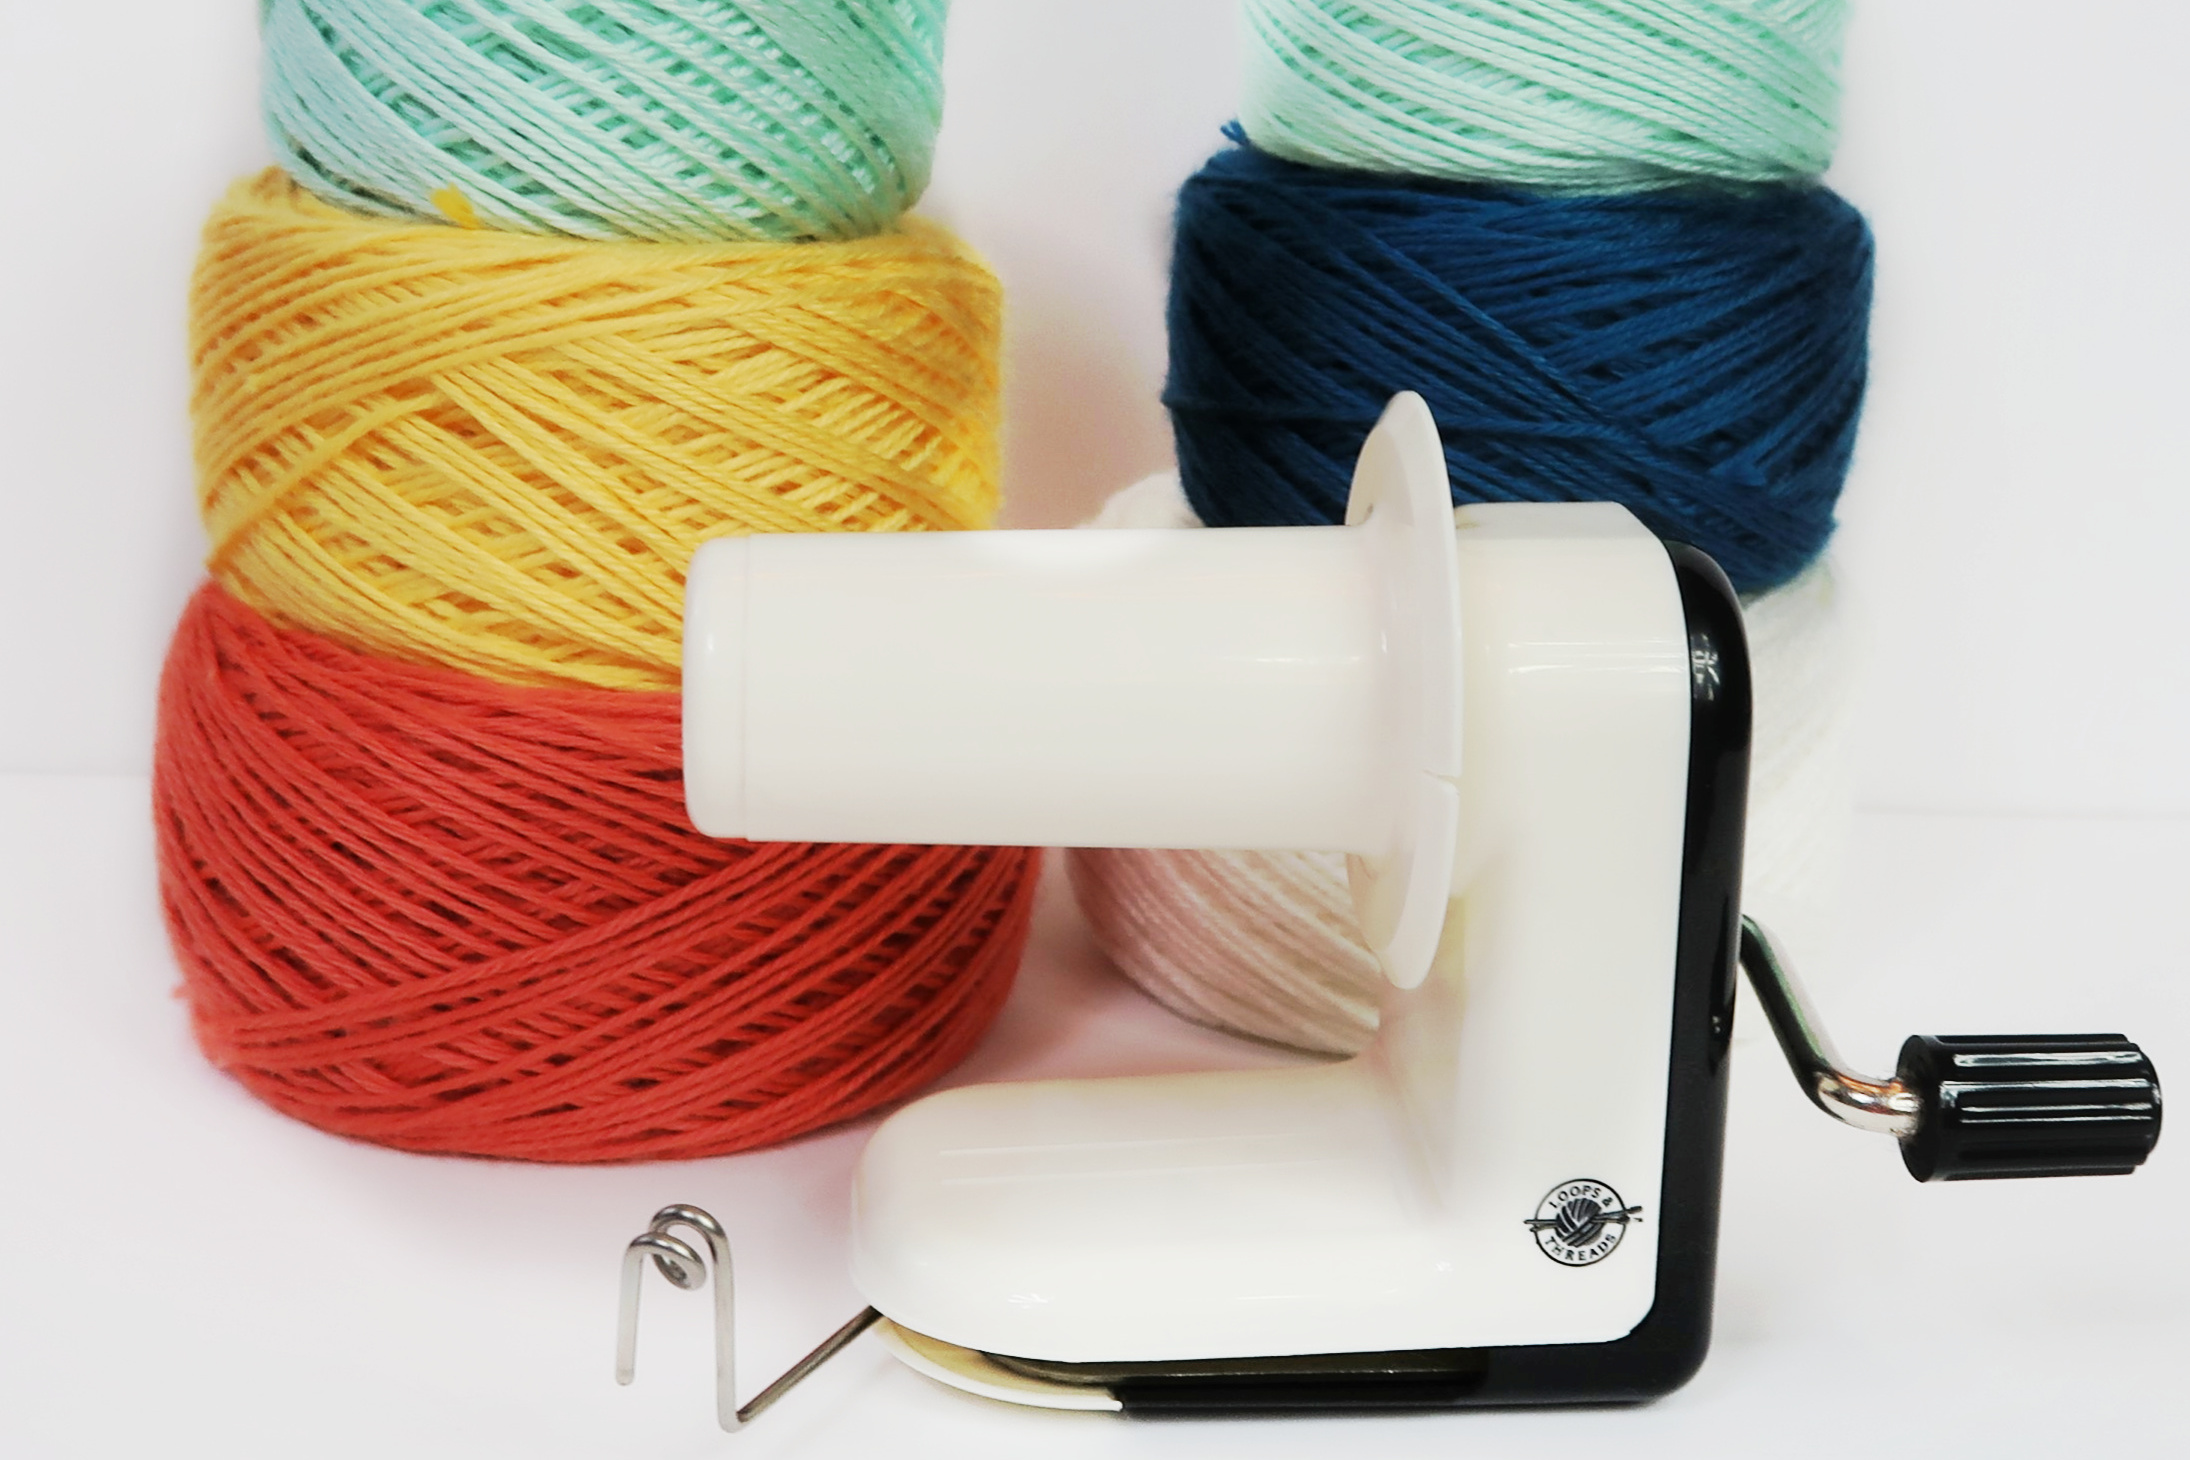 The Best Hand Operated Yarn Winders - Looped and Knotted